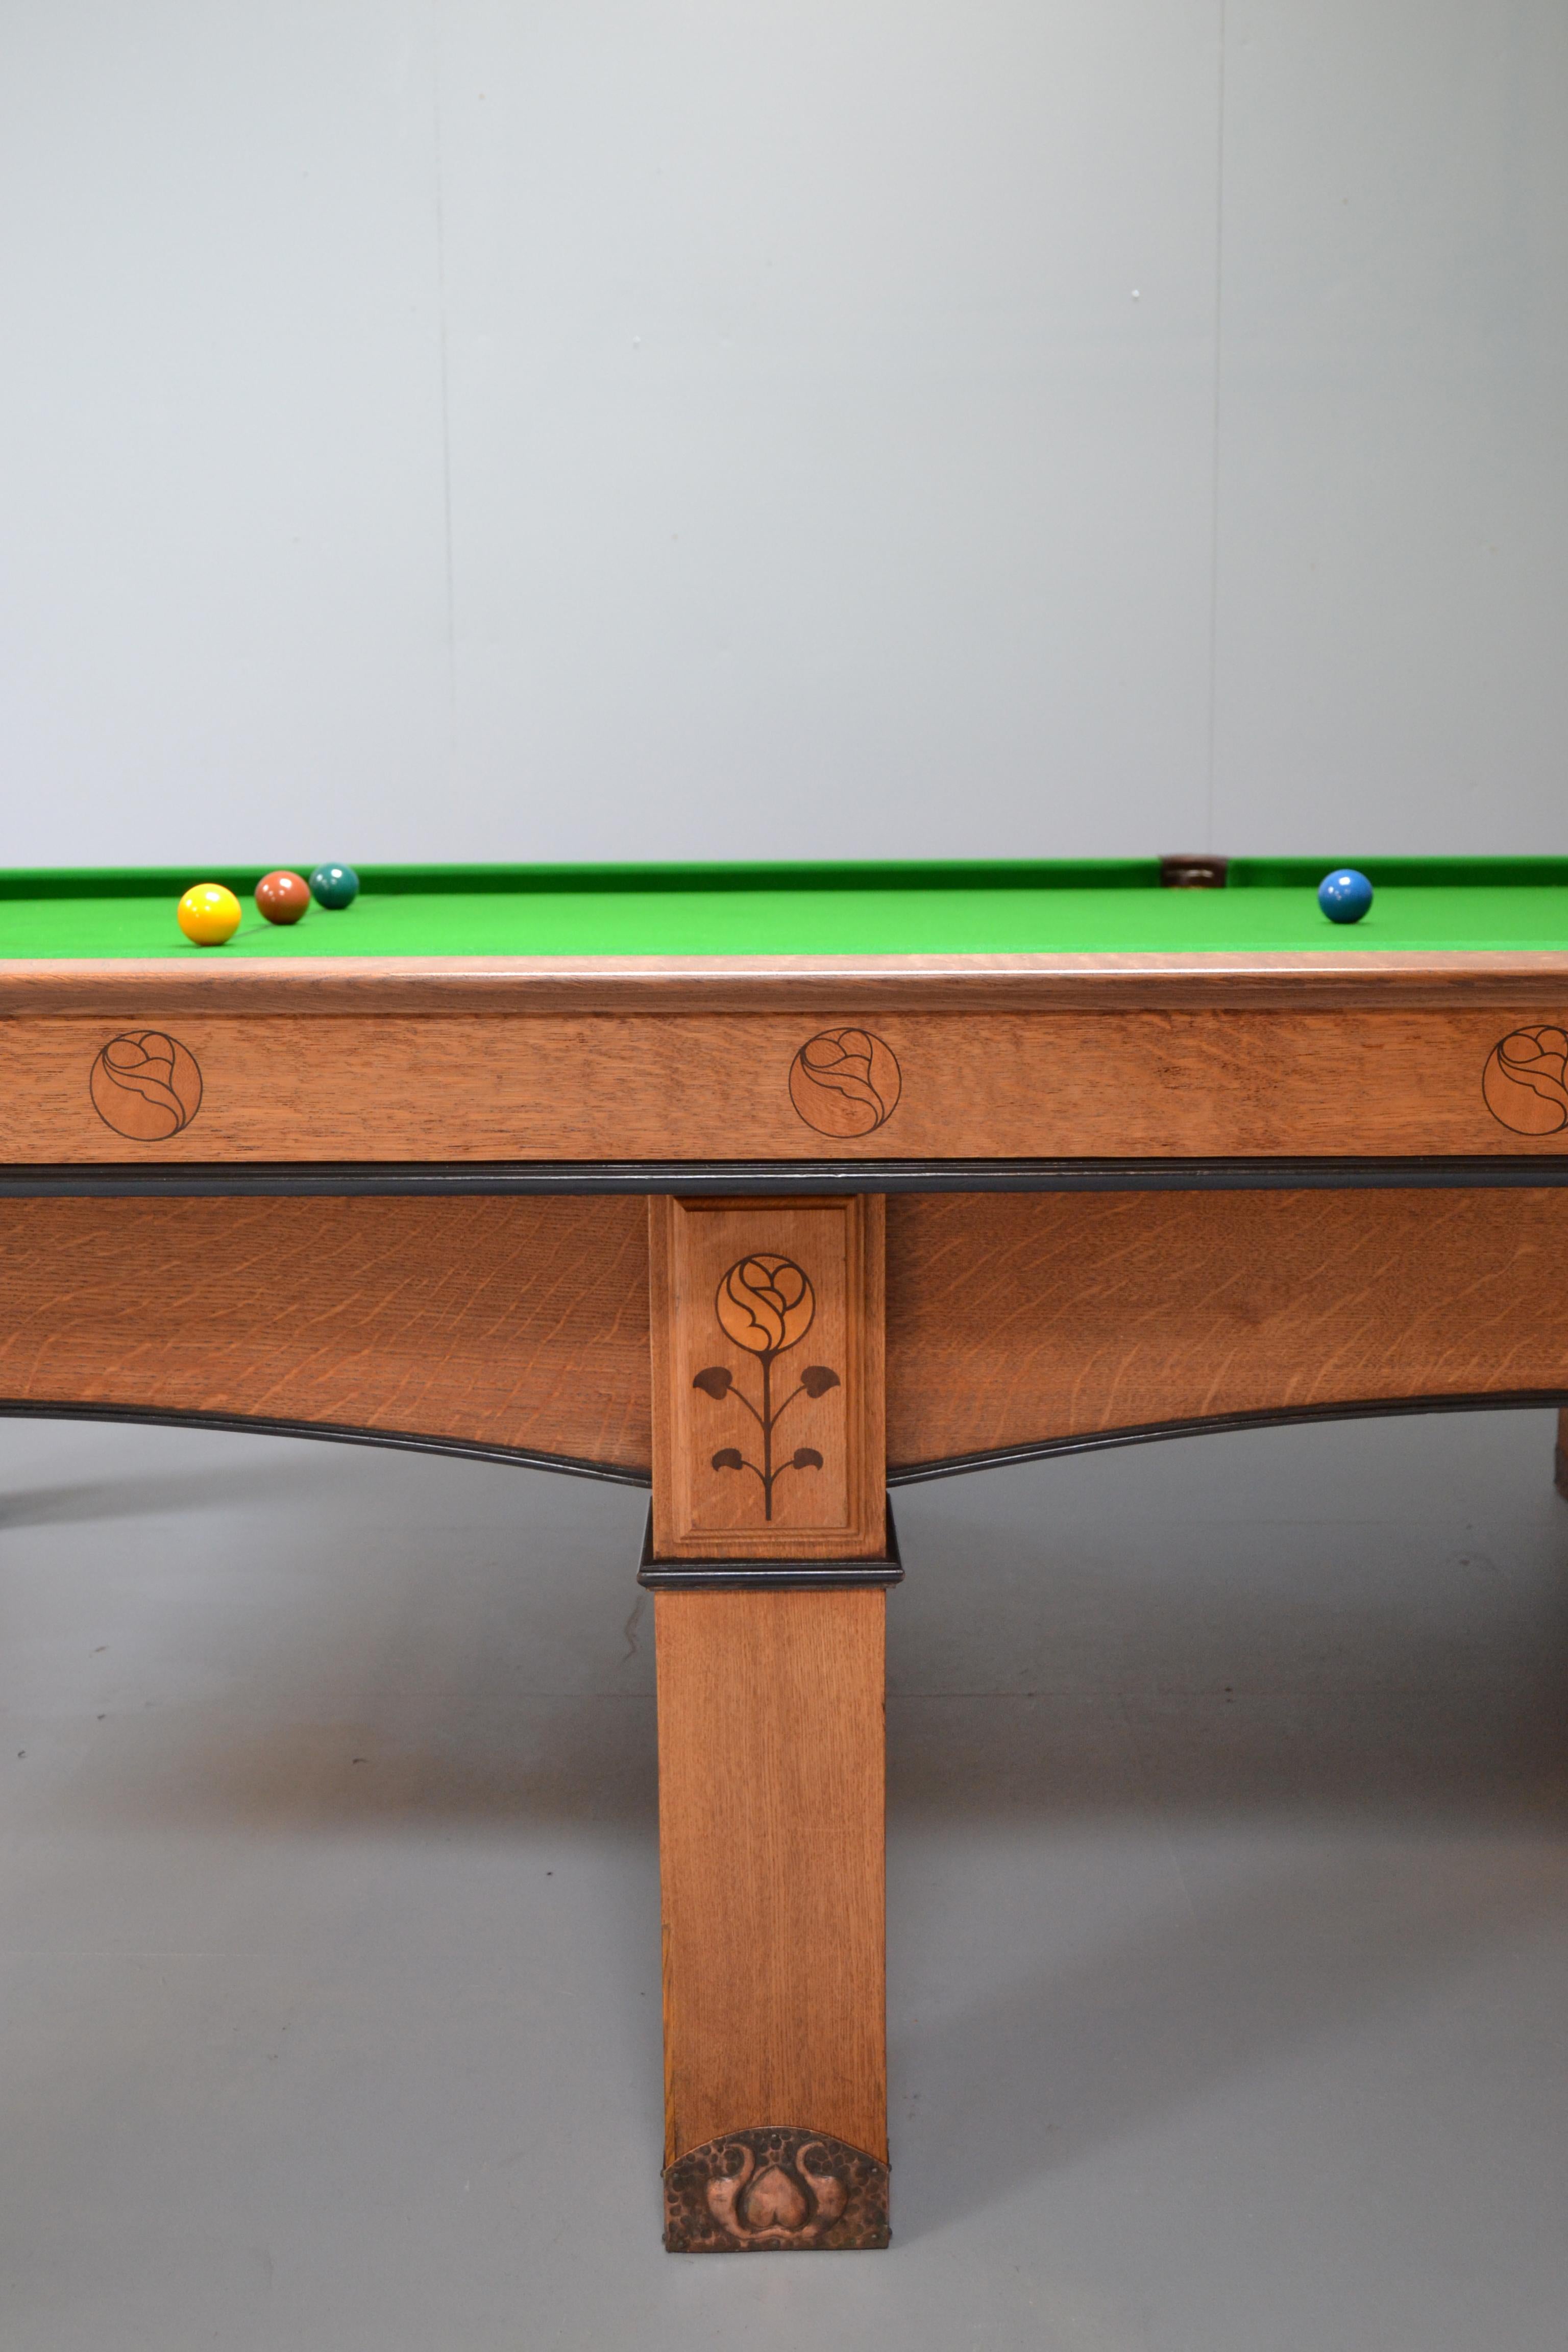 Billiard snooker pool table oak inlaid arts and crafts glasgow school scotland For Sale 3